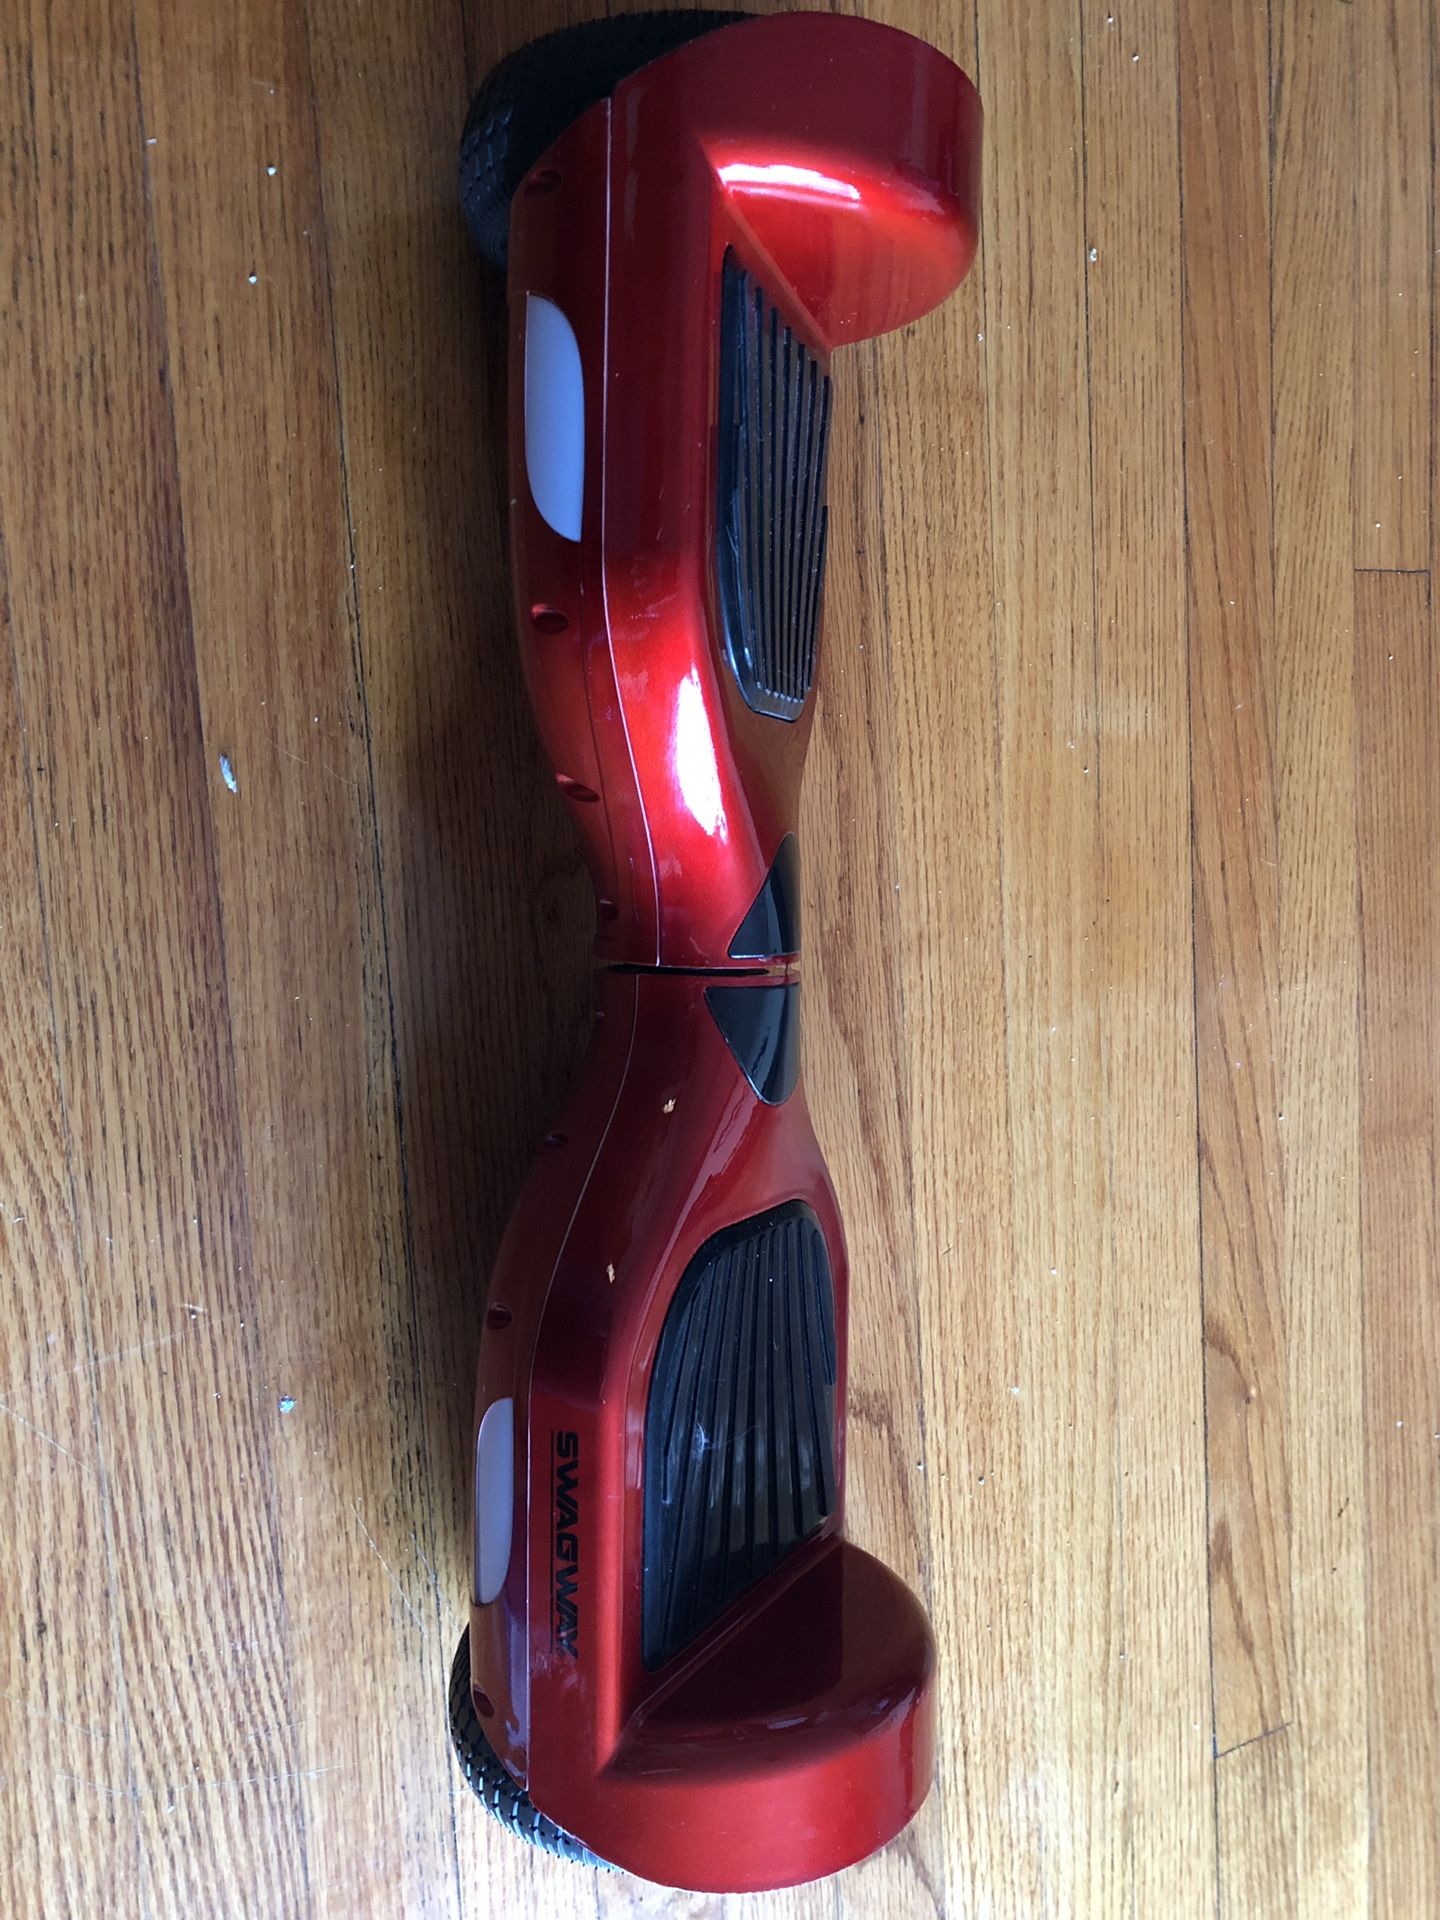 Red “Swagway” hoverboard, used but in great condition